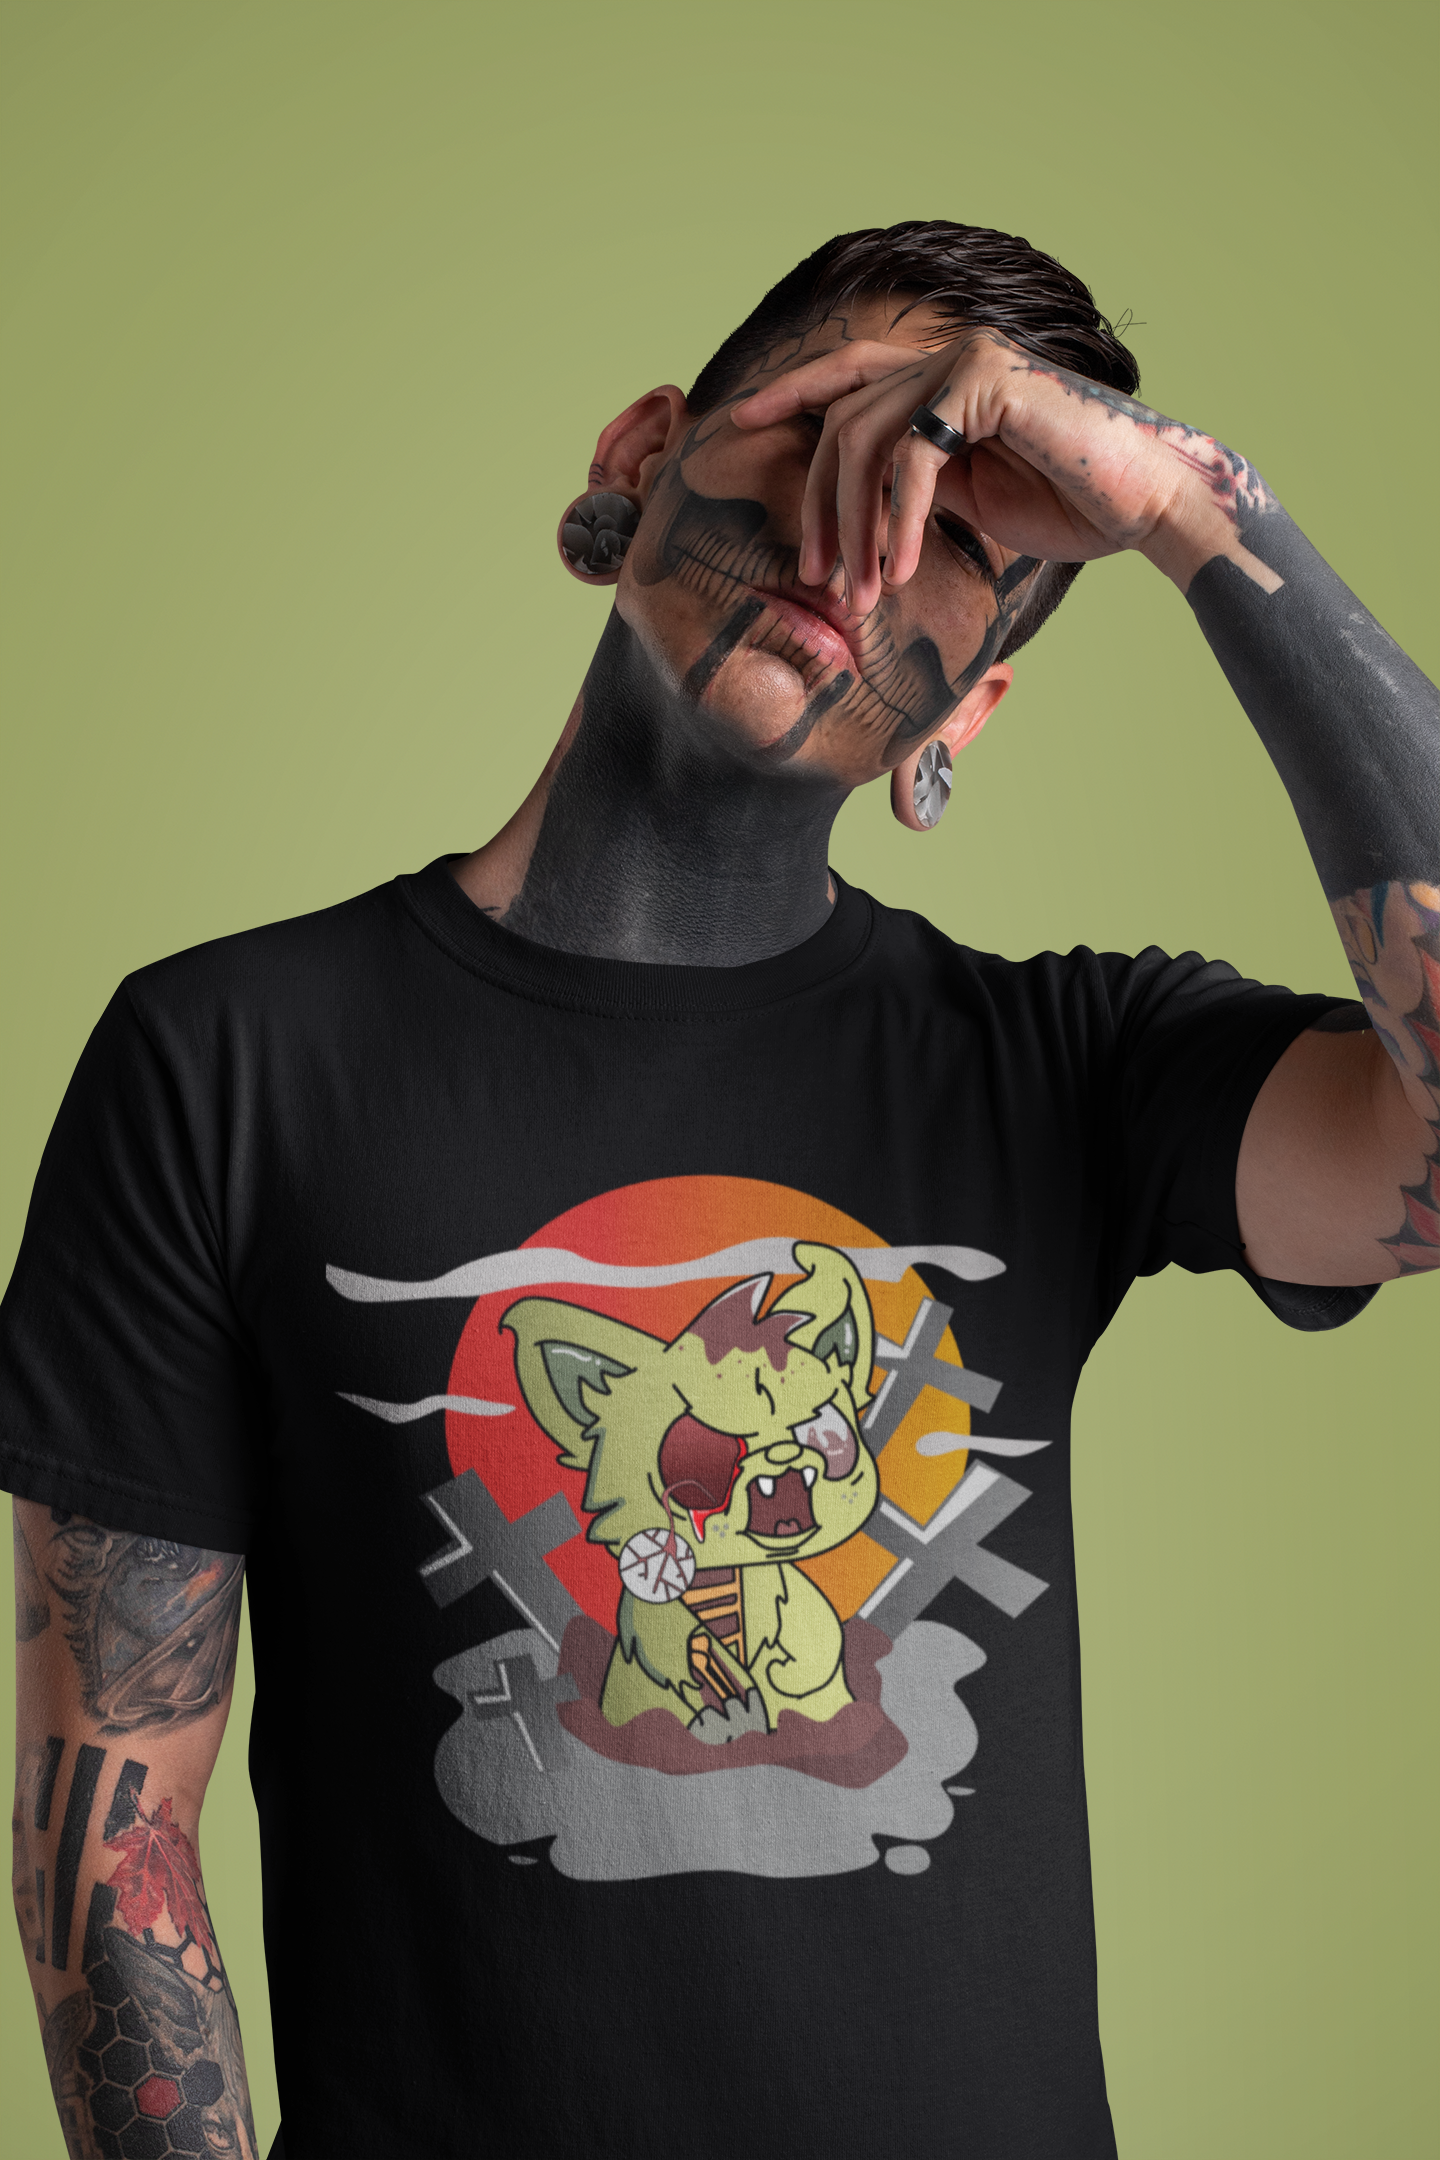 Zombie Chupacabra Champion T-shirt by Certified